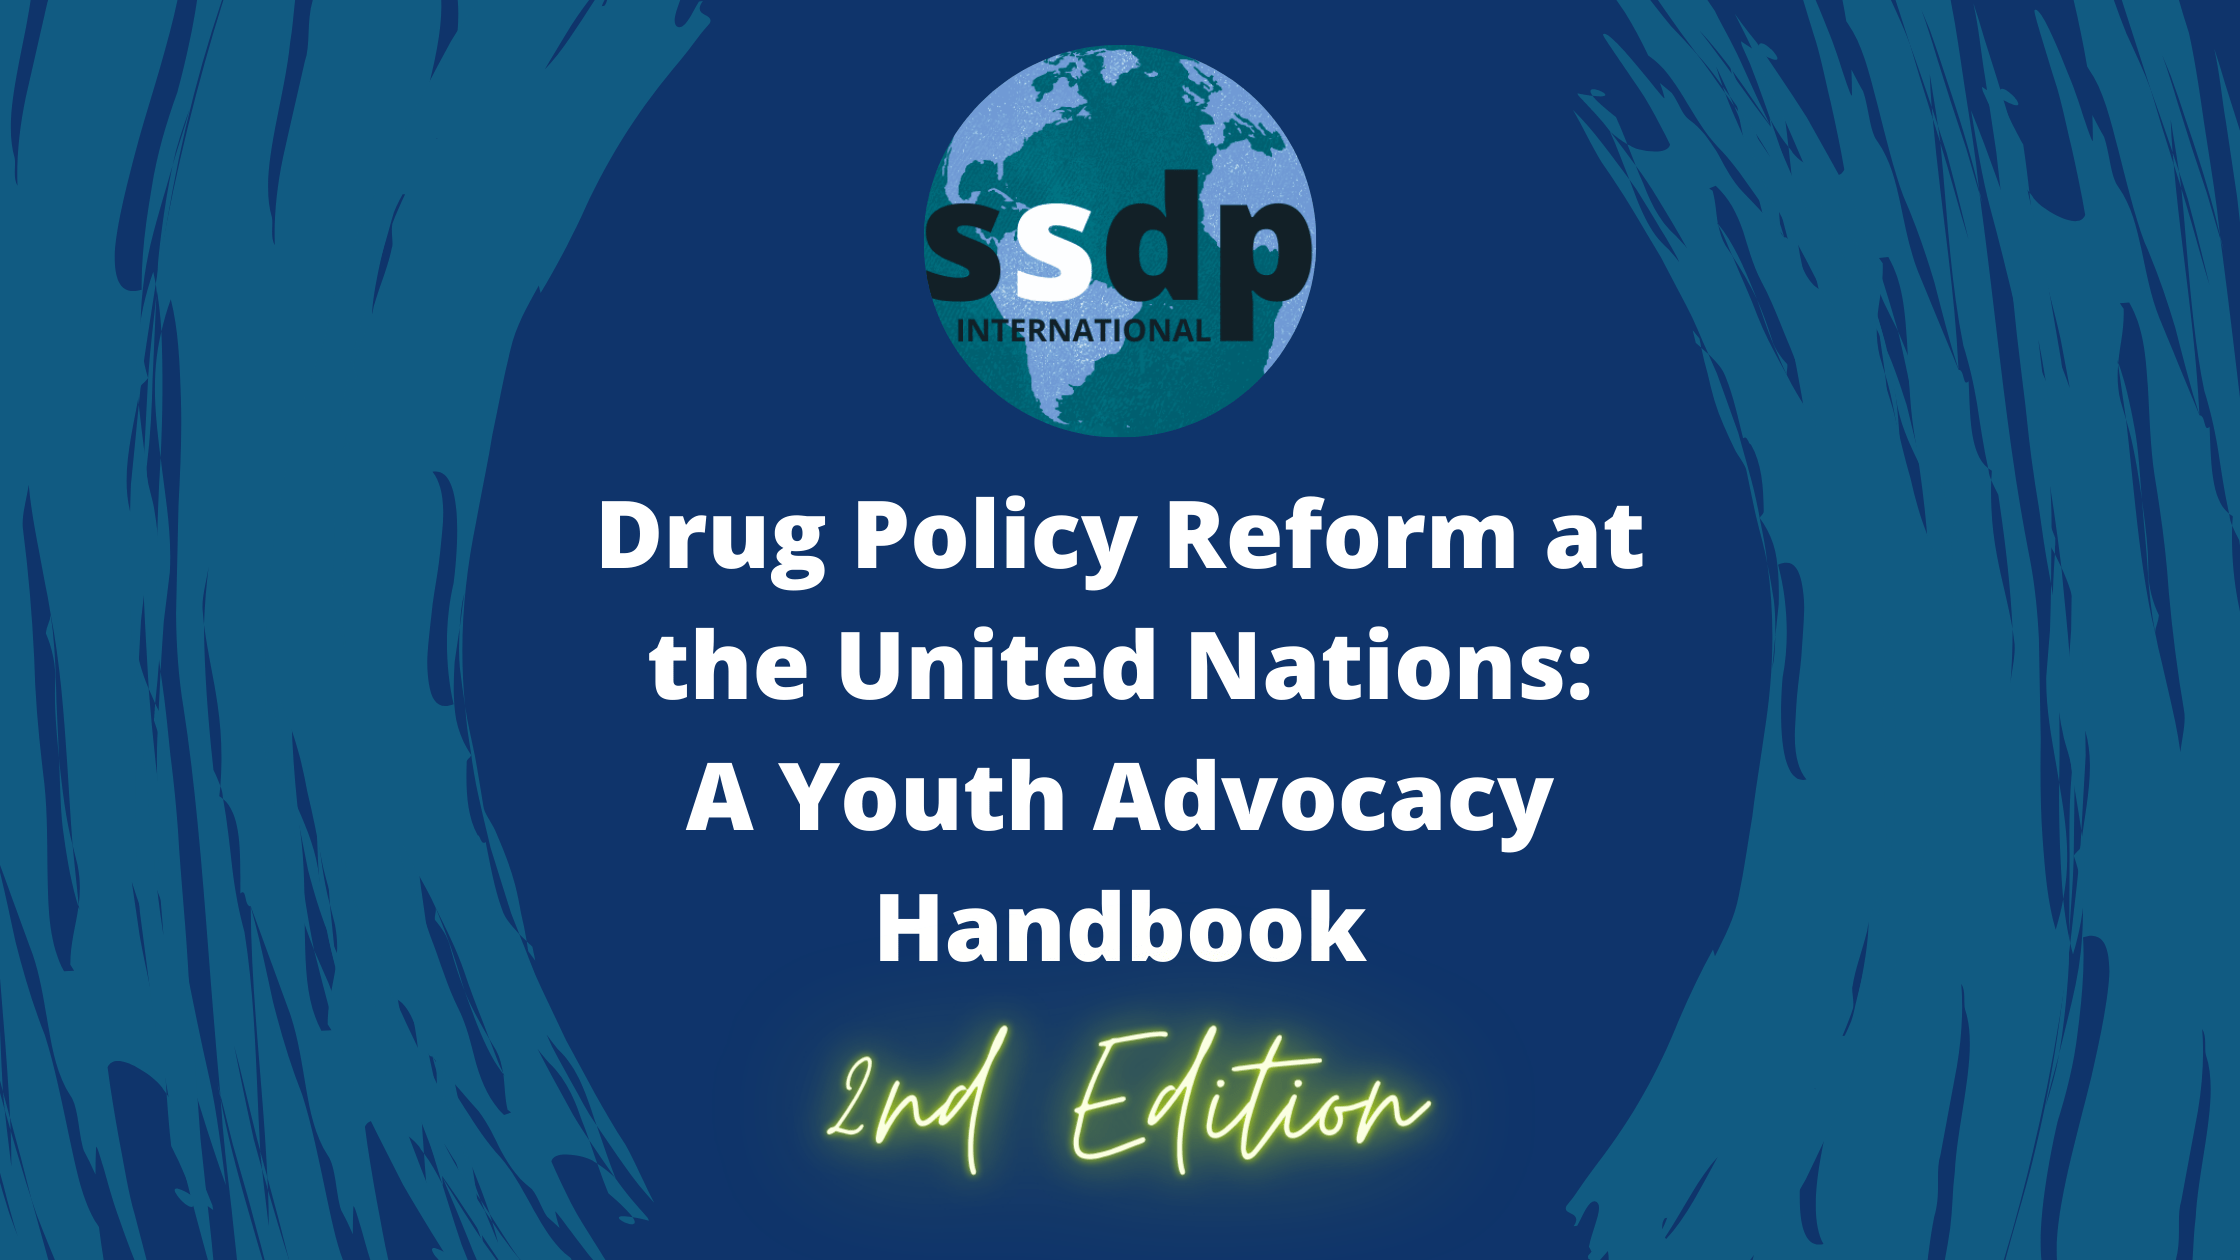 Drug Policy Reform at the United Nations: A Youth Advocacy Handbook, 2nd Edition